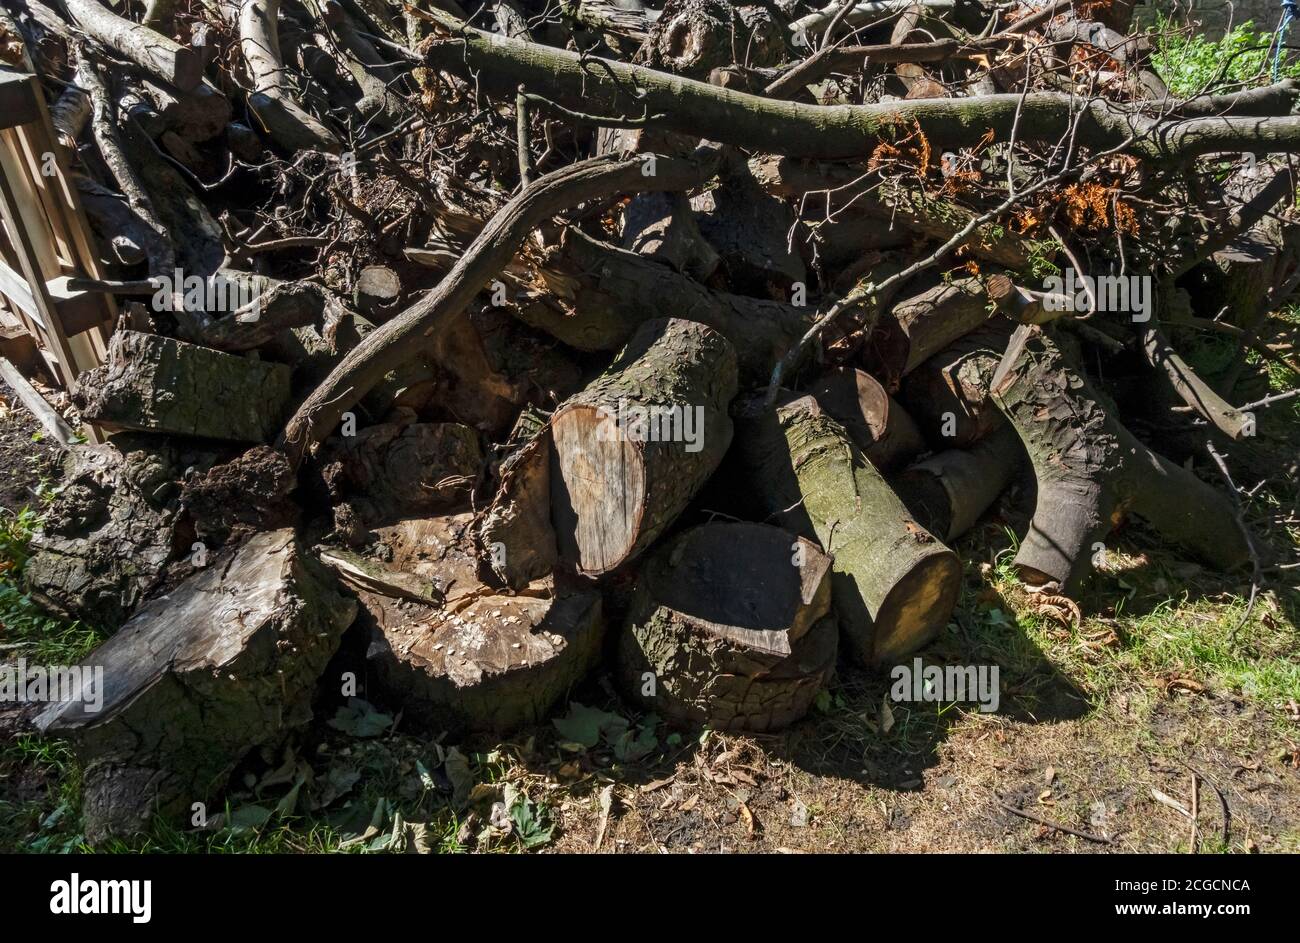 Close up of woodpile in a park pile of sawn wood England UK United Kingdom GB Great Britain Stock Photo